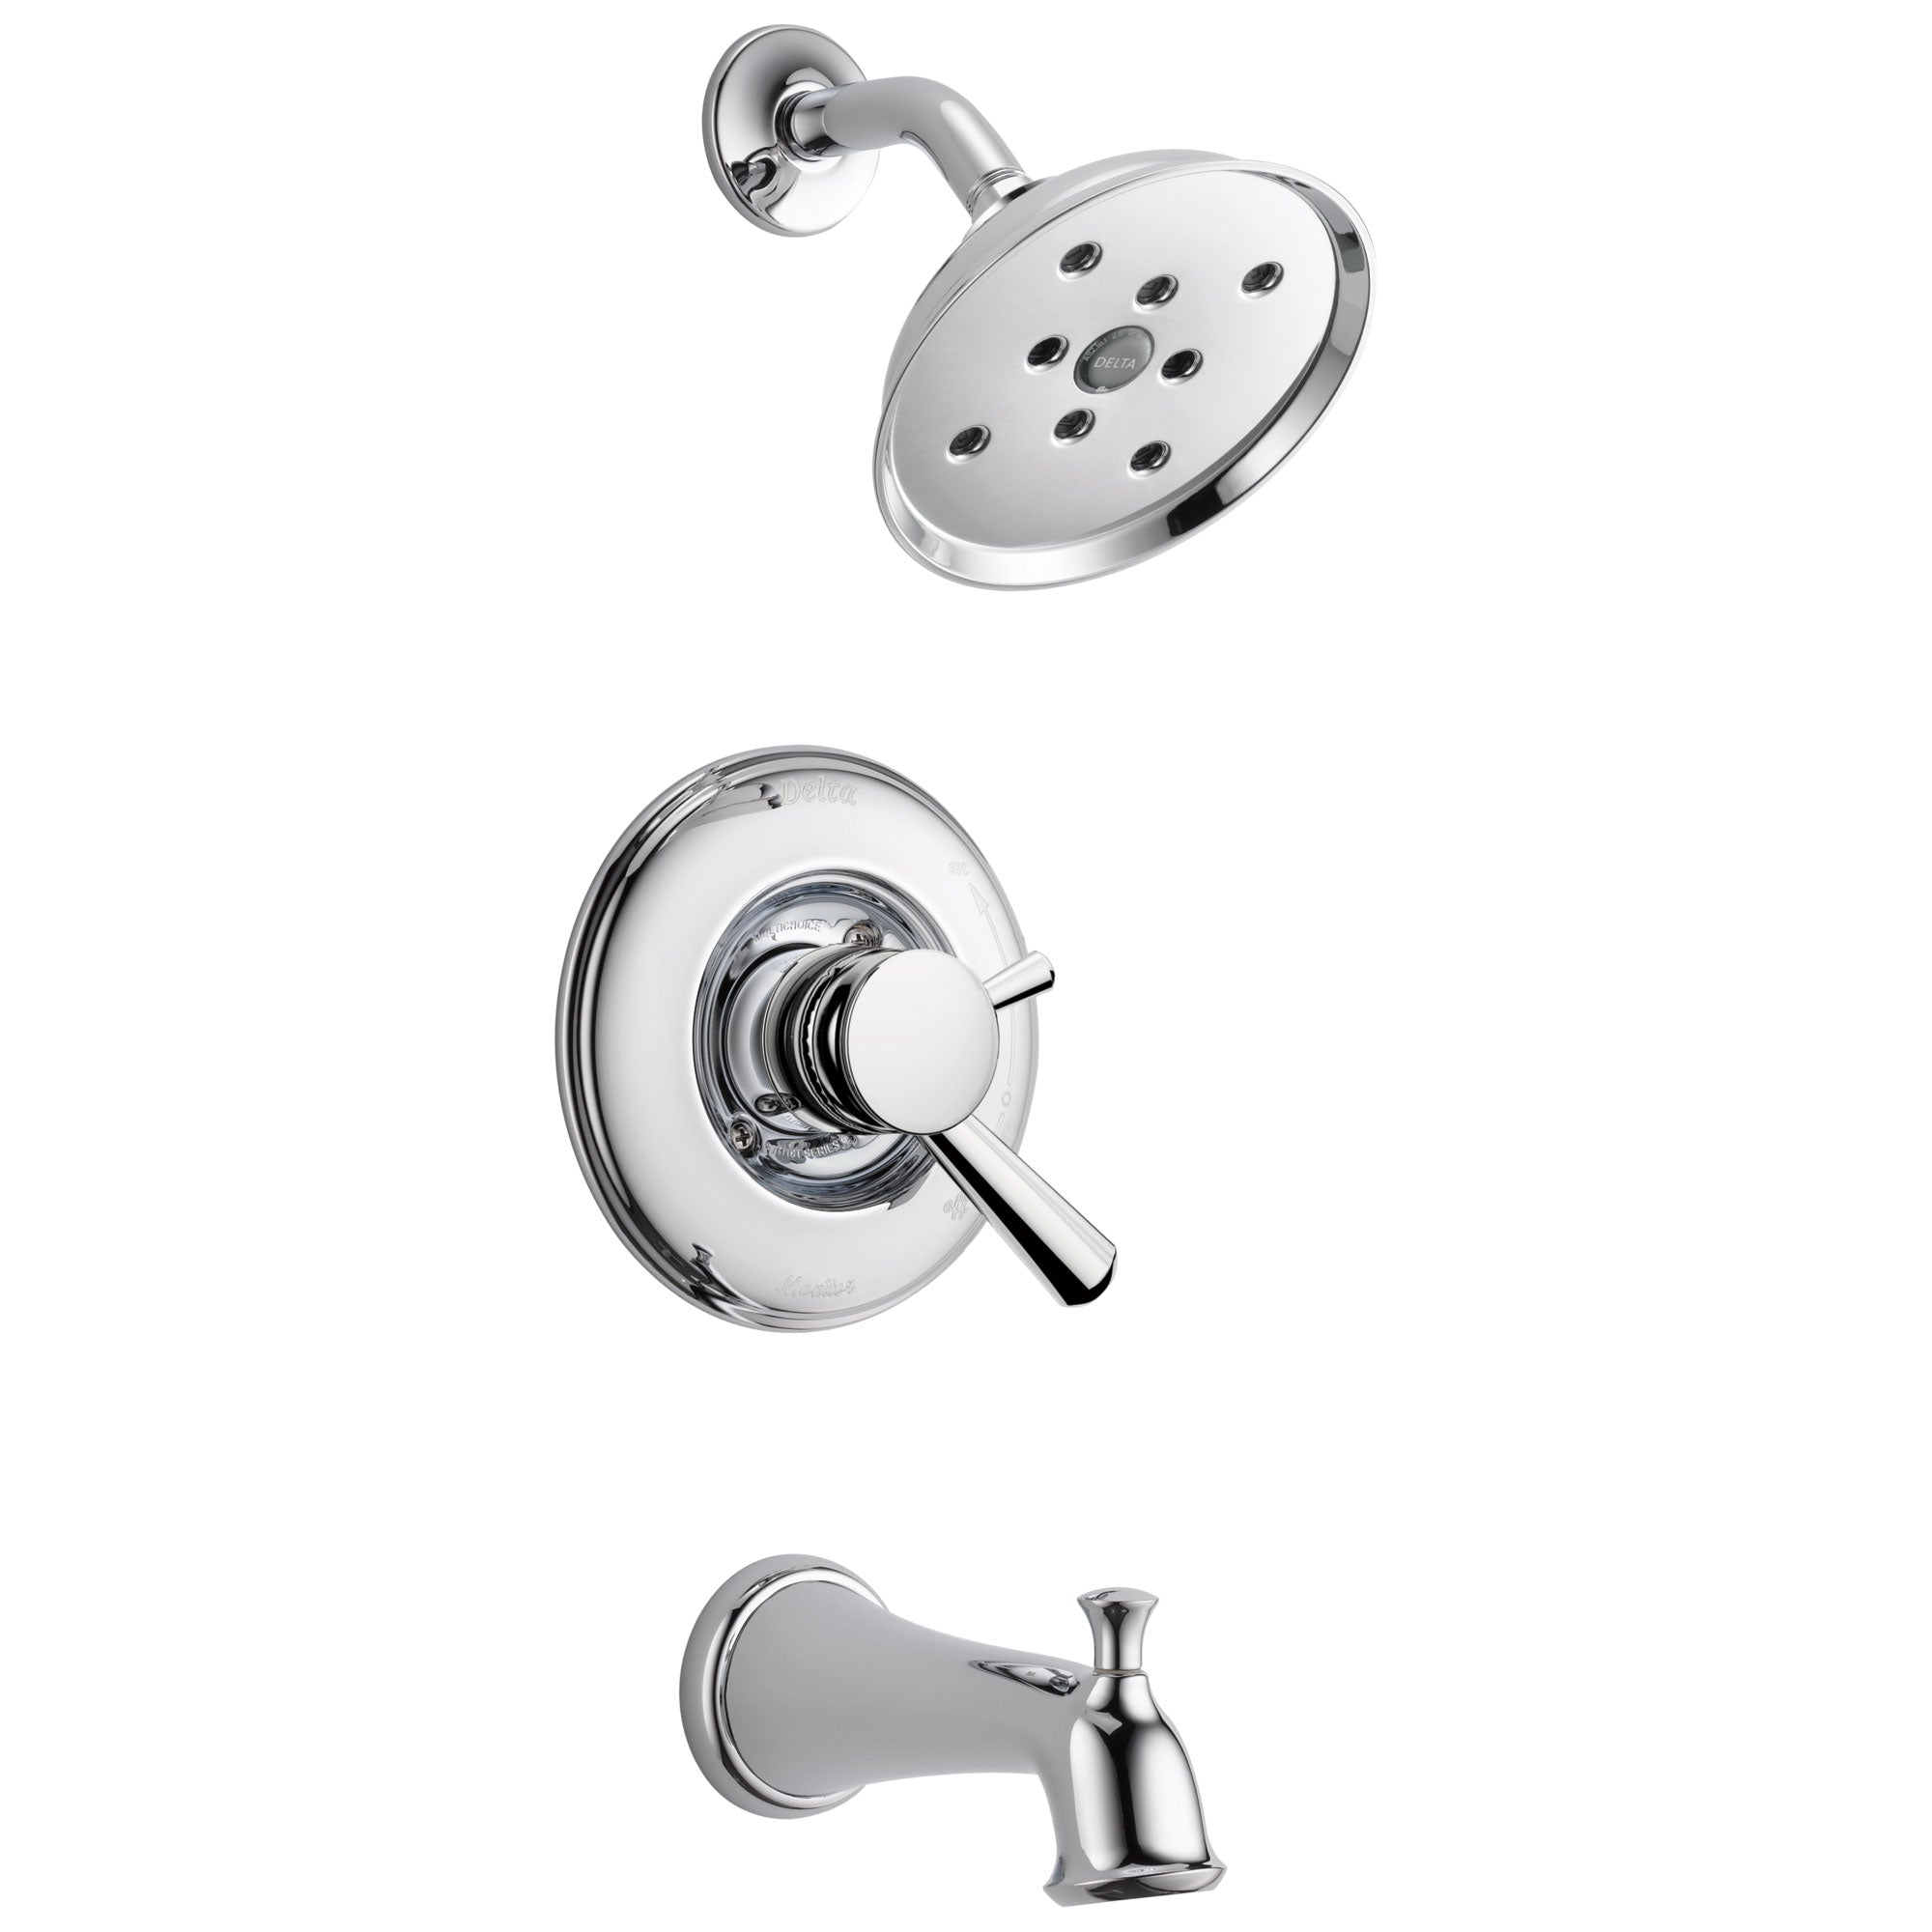 Delta Linden Collection Chrome Finish Monitor 17 Series H2Okinetic Tub and Shower Combination Faucet Includes Rough Valve with Stops D2294V